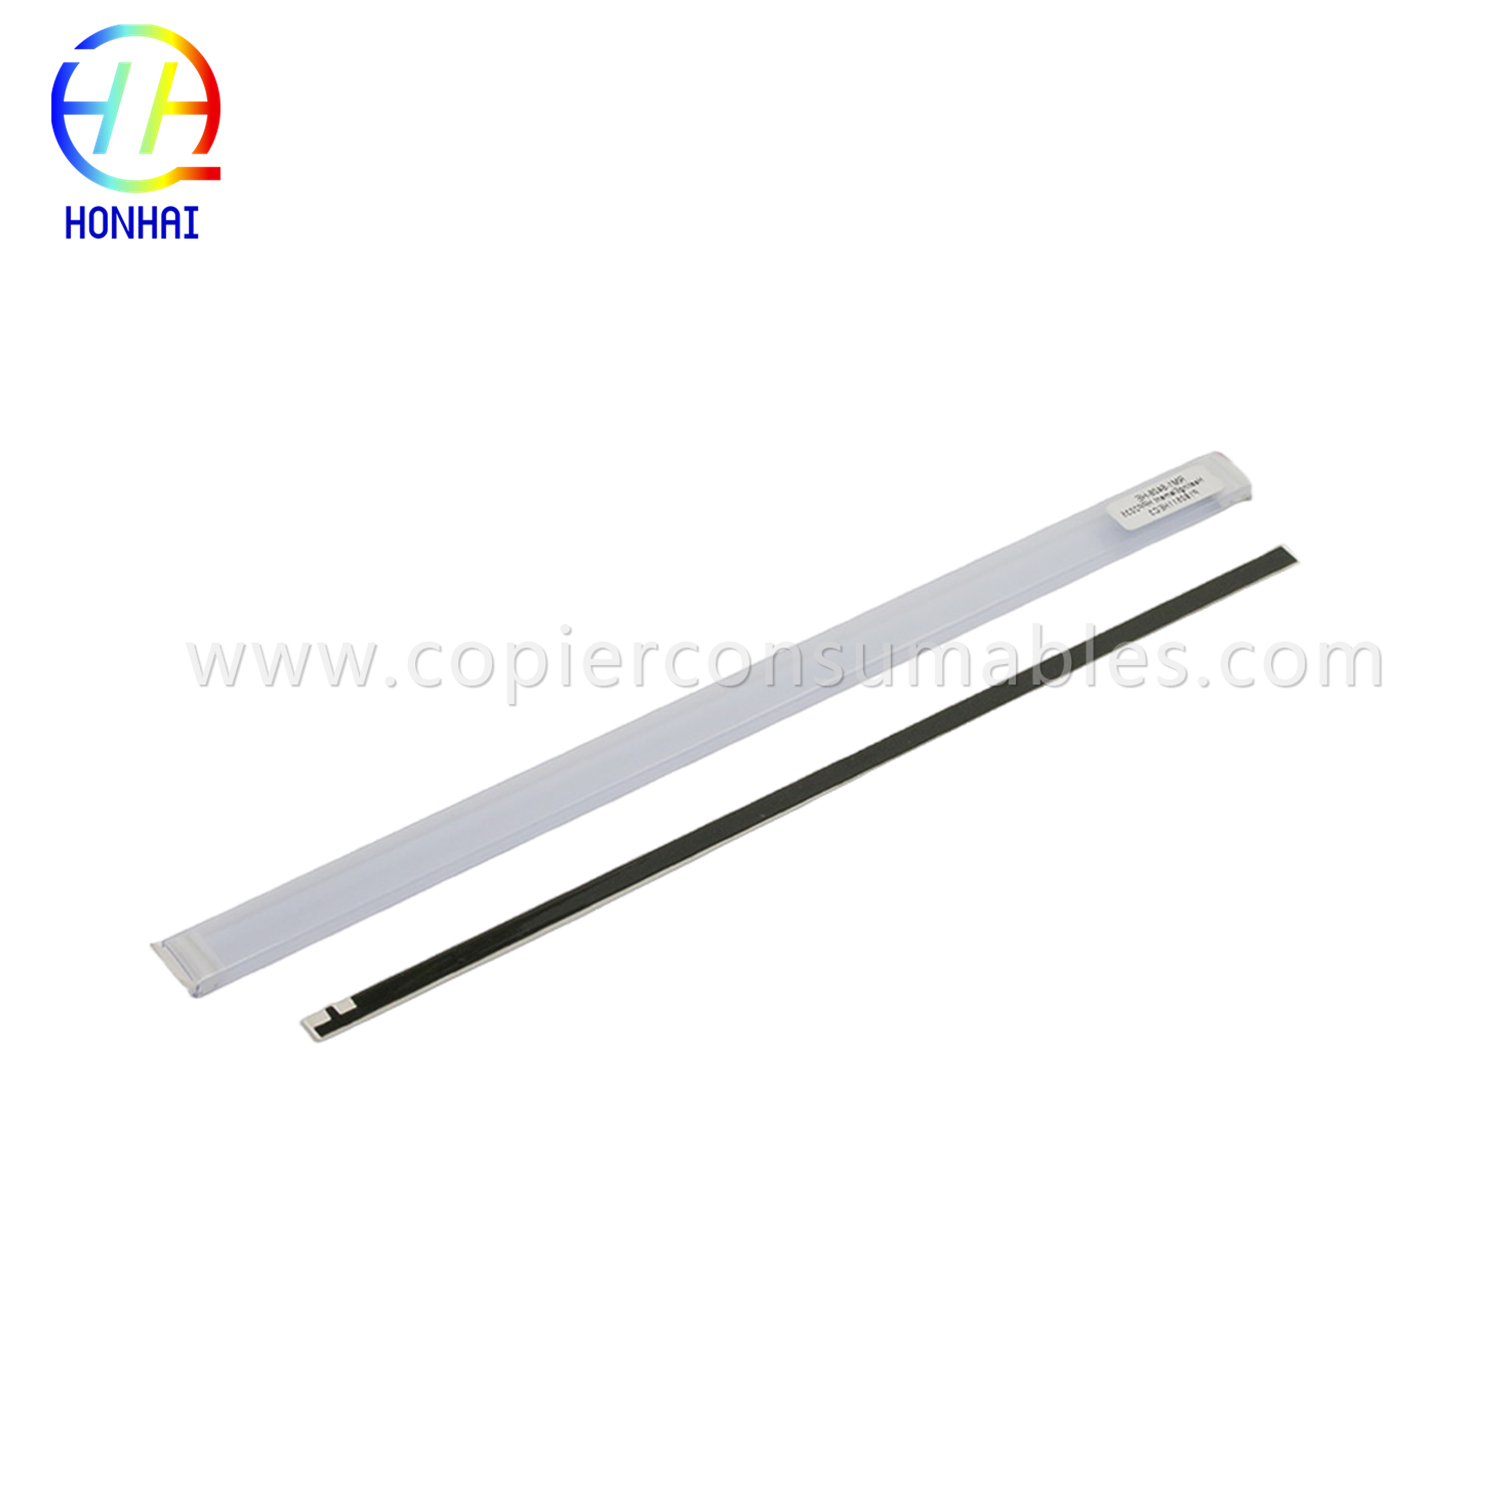 Heating Element for HP P2035